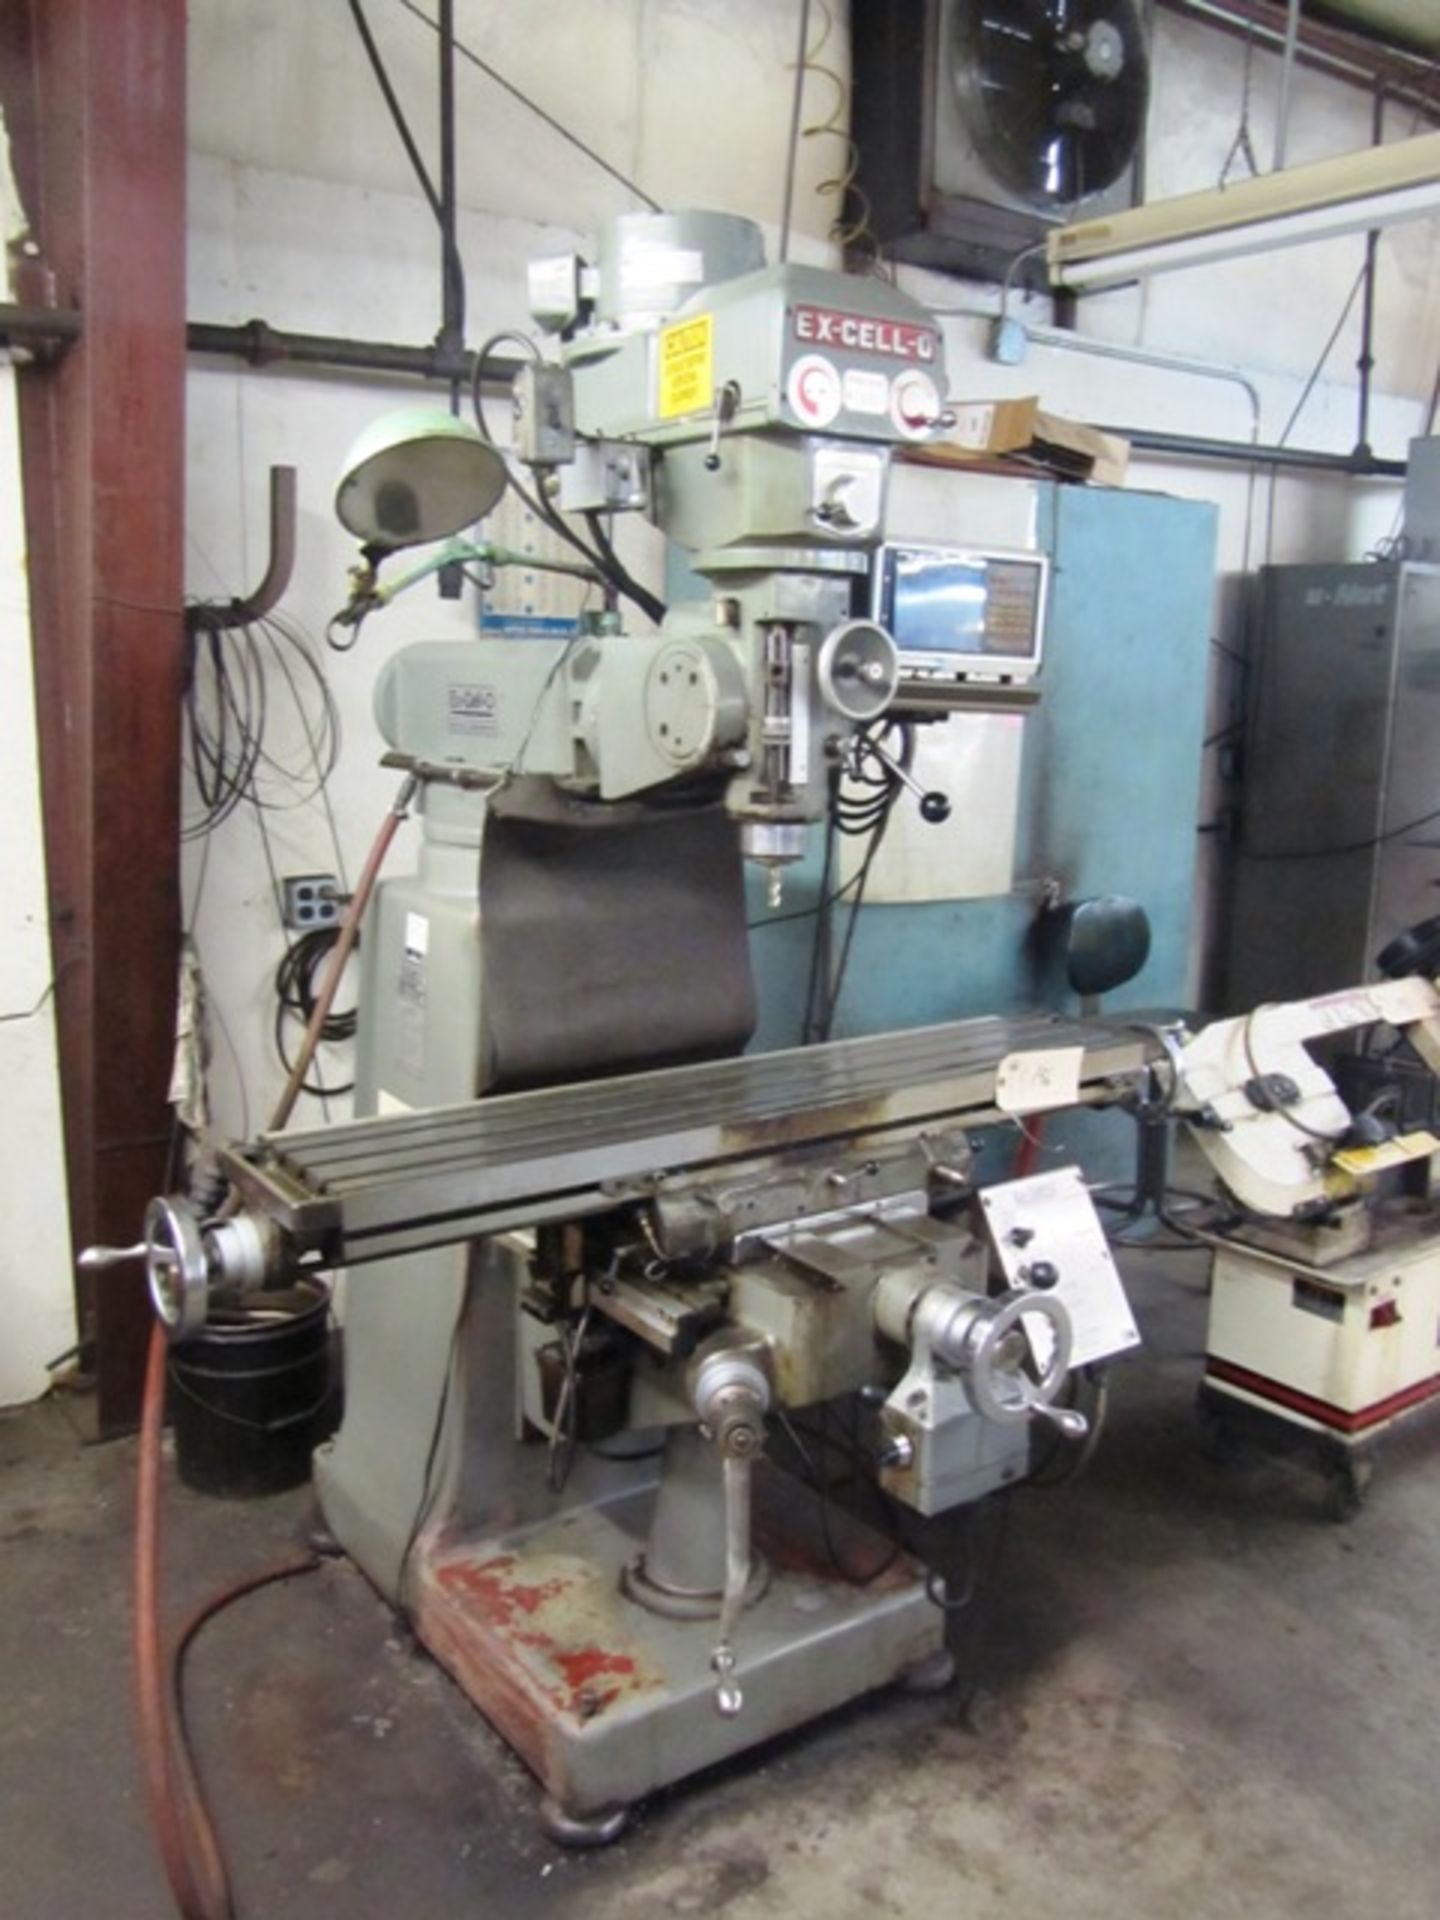 Excello Model 602 Vertical Milling Machine - Image 3 of 3